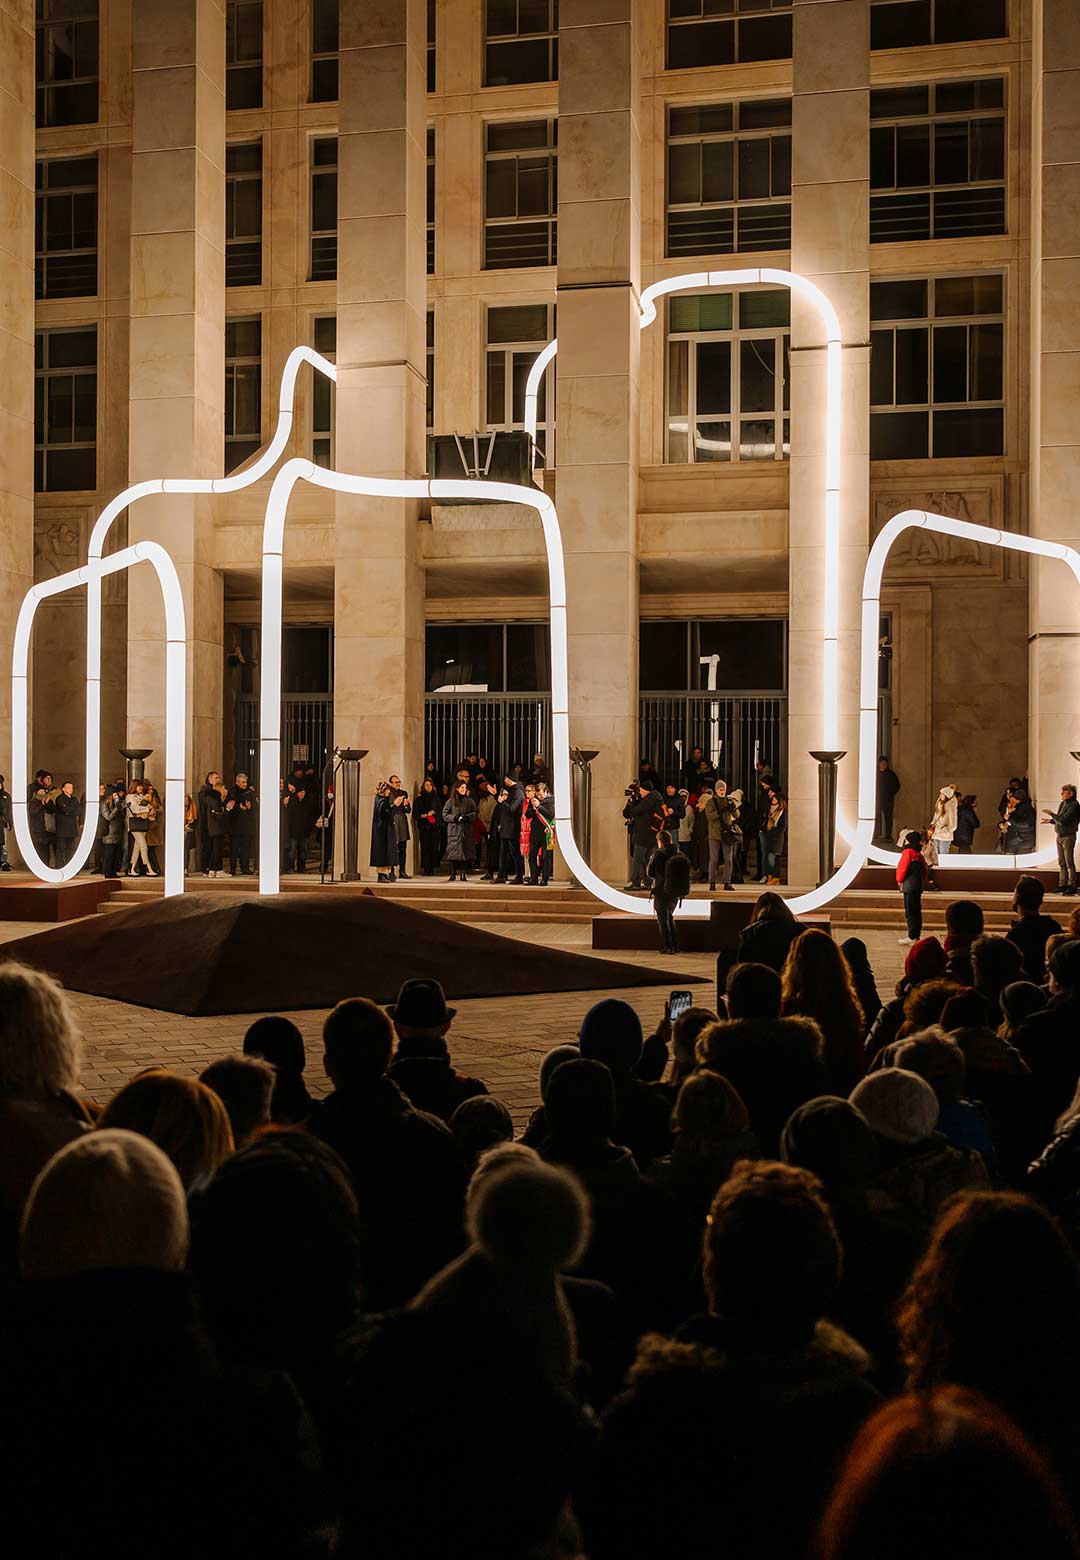 ‘Lights On’ by Objects of Common Interest activates a desolate Italian public plaza